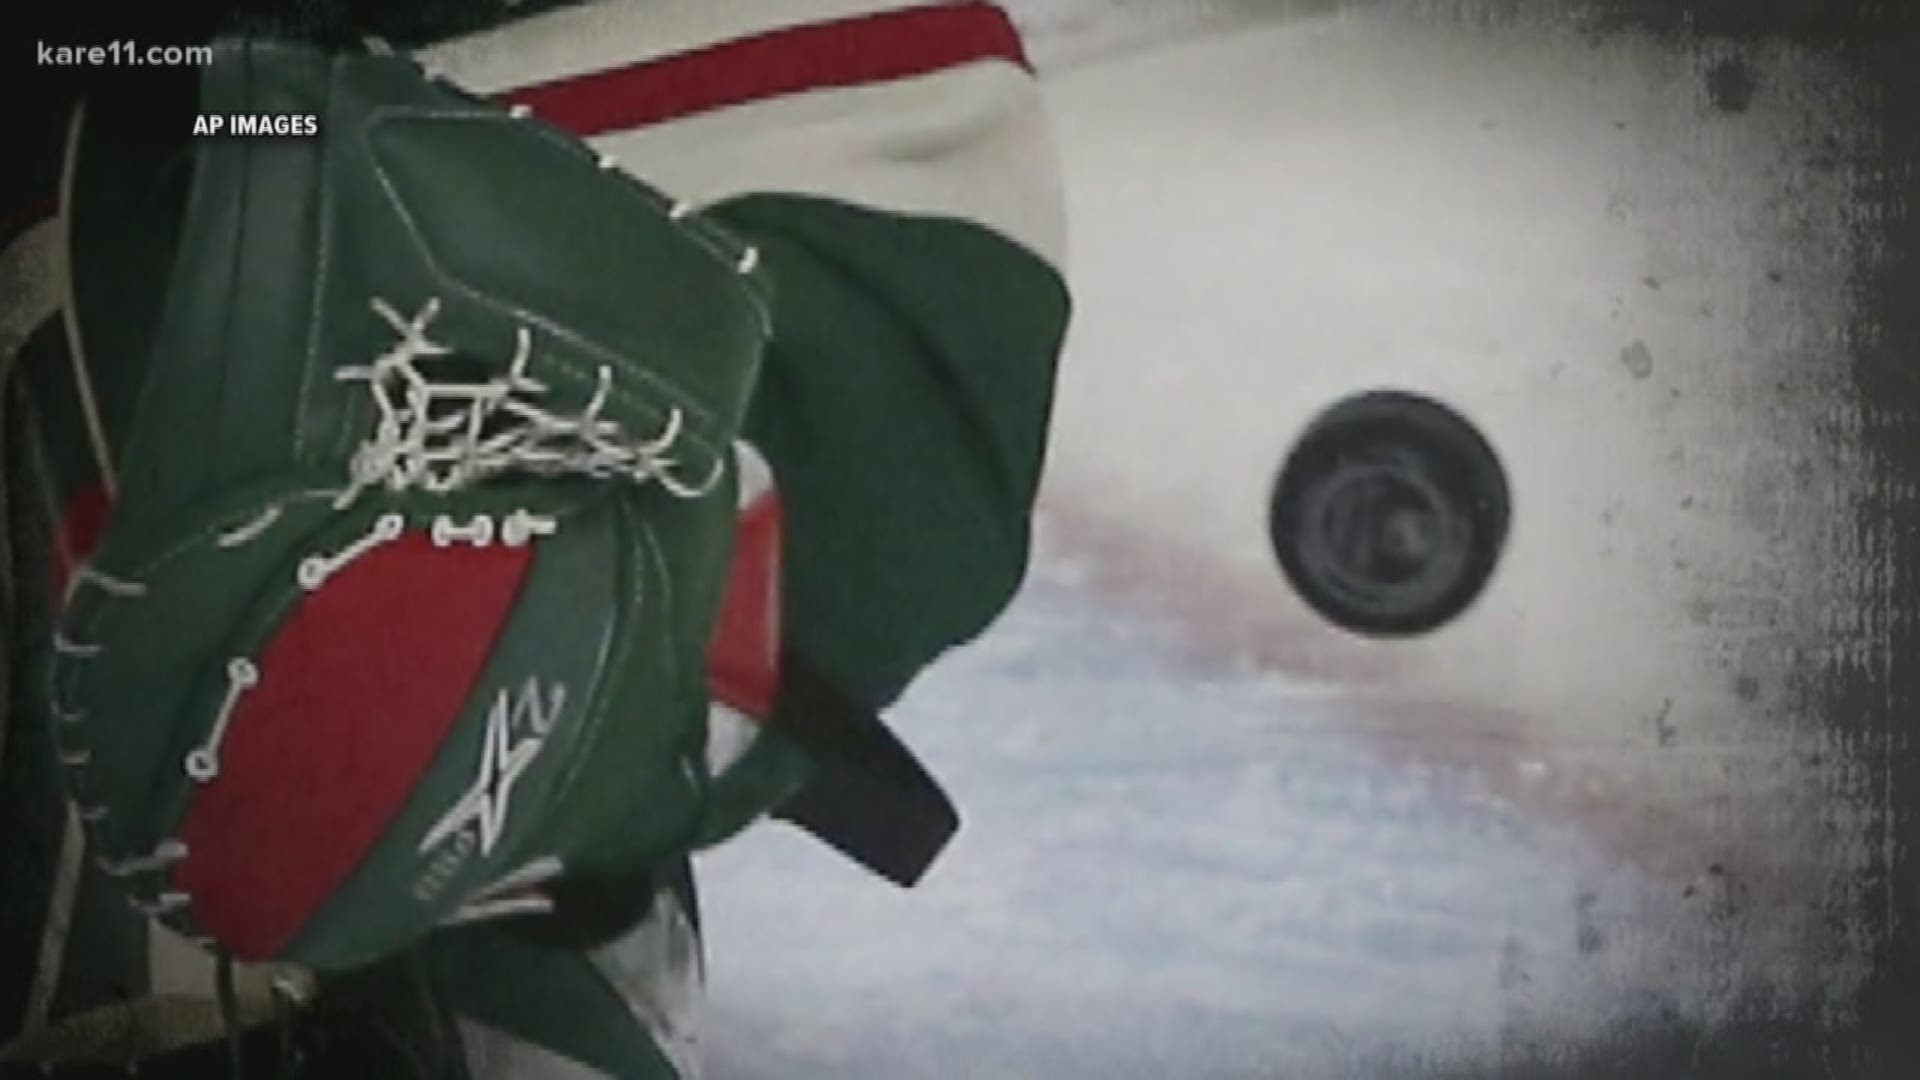 Sunday's four to nothing loss at home got the Wild booed off the ice. Yikes. Rena sat down today with the Star Tribune's Michael Rand to get his take on the turbulence. https://kare11.tv/2trbstw